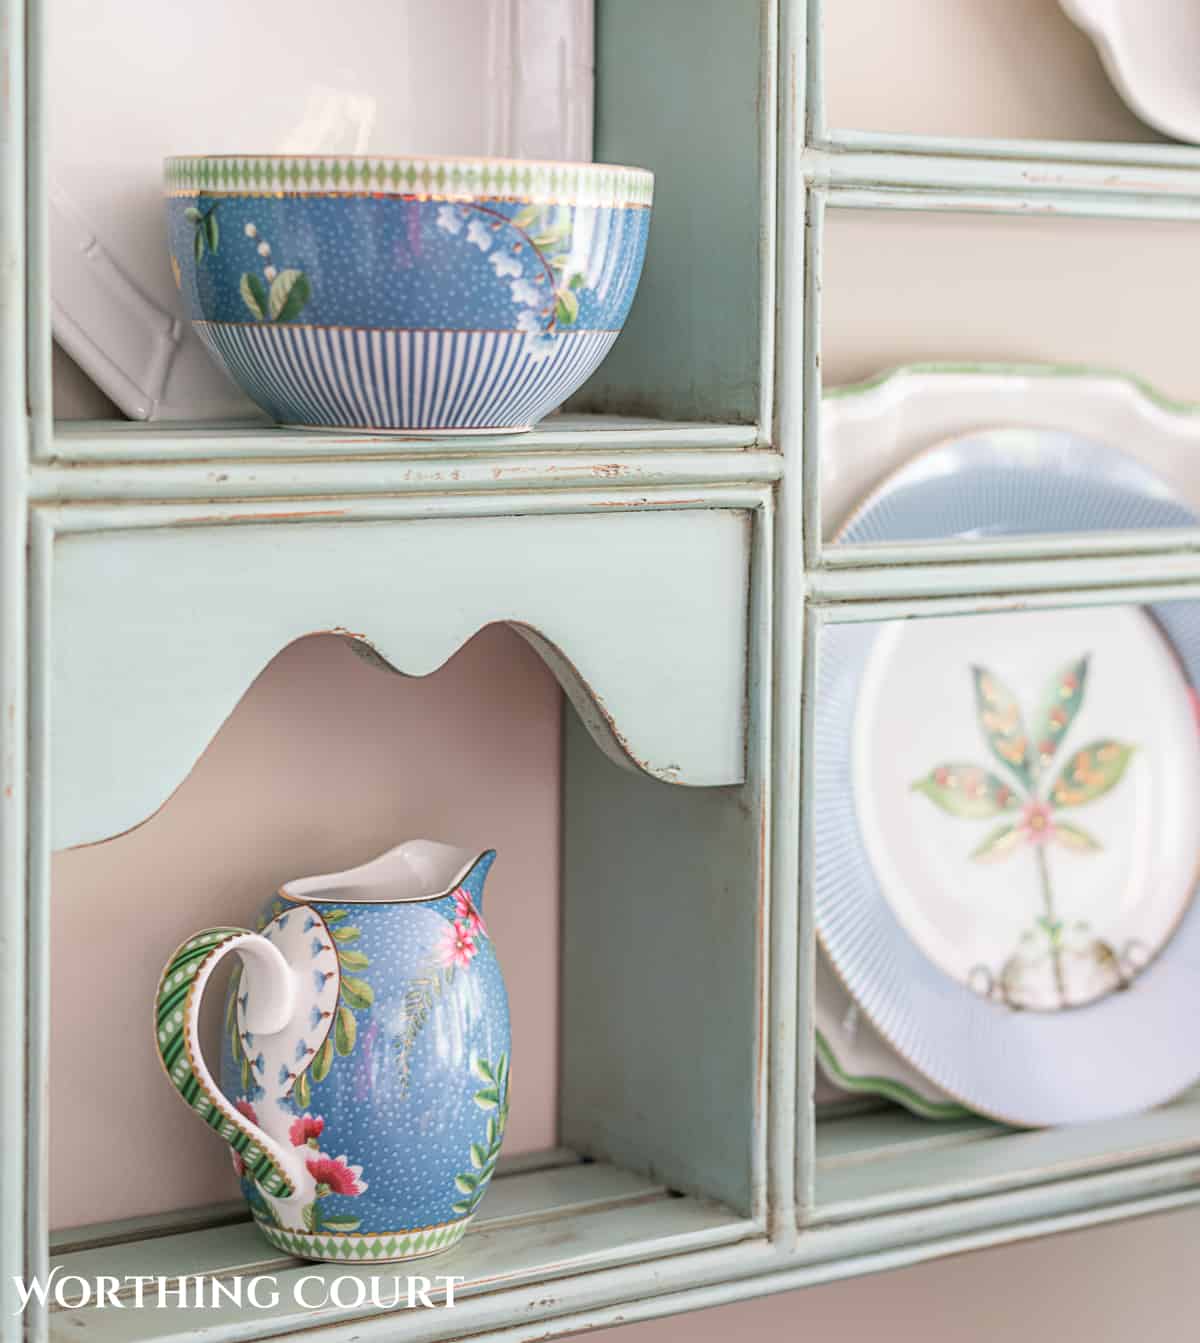 Displaying Decorative Plates on a Plate Rack